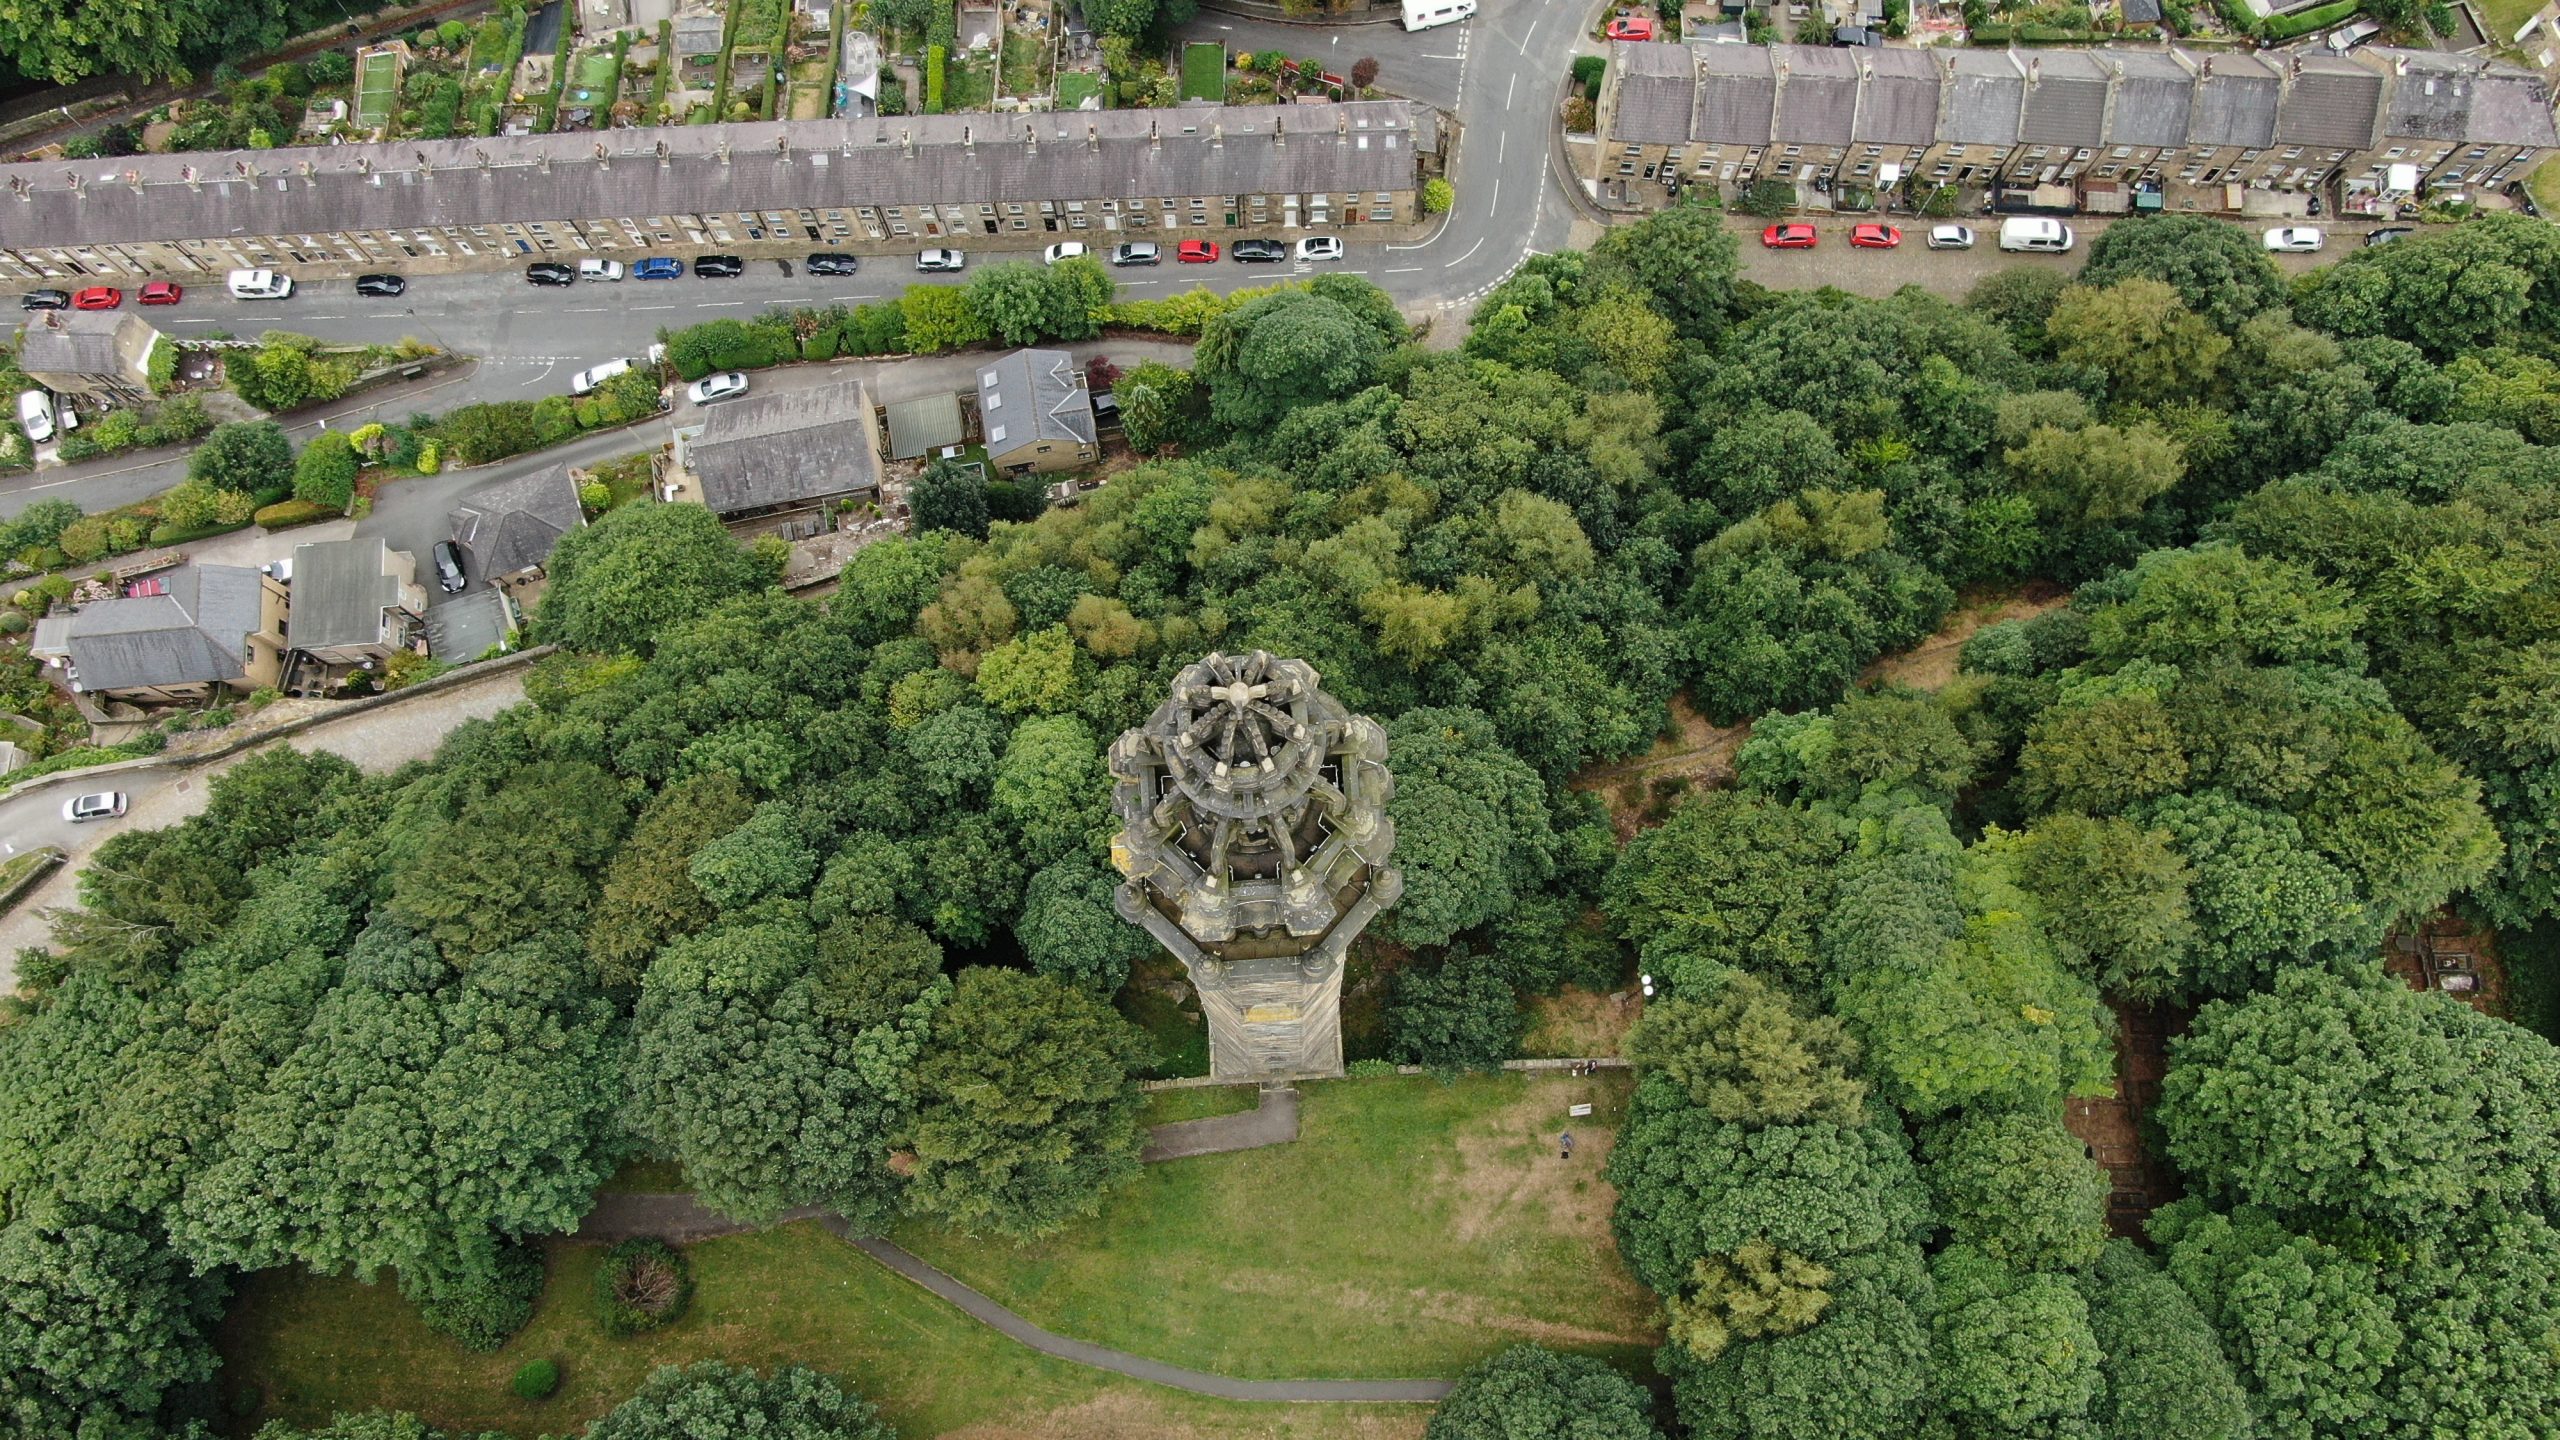 Wainhouse tower from above